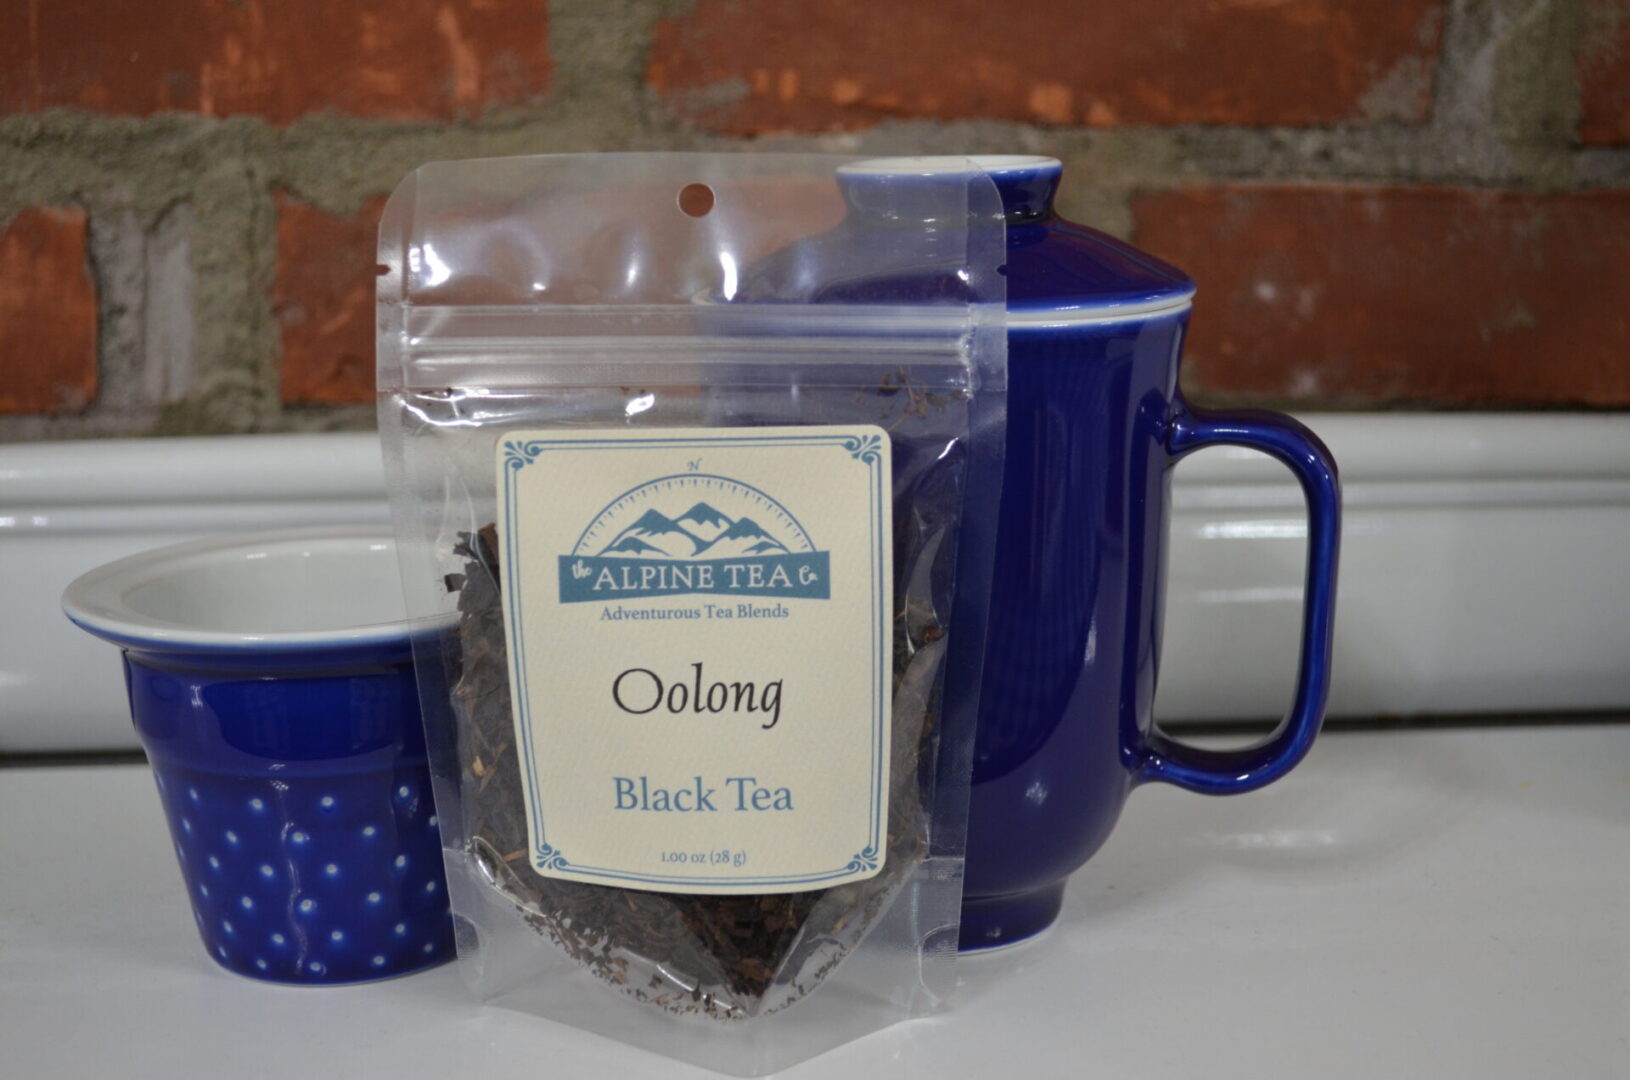 A bag of oolong tea sitting on top of a counter.